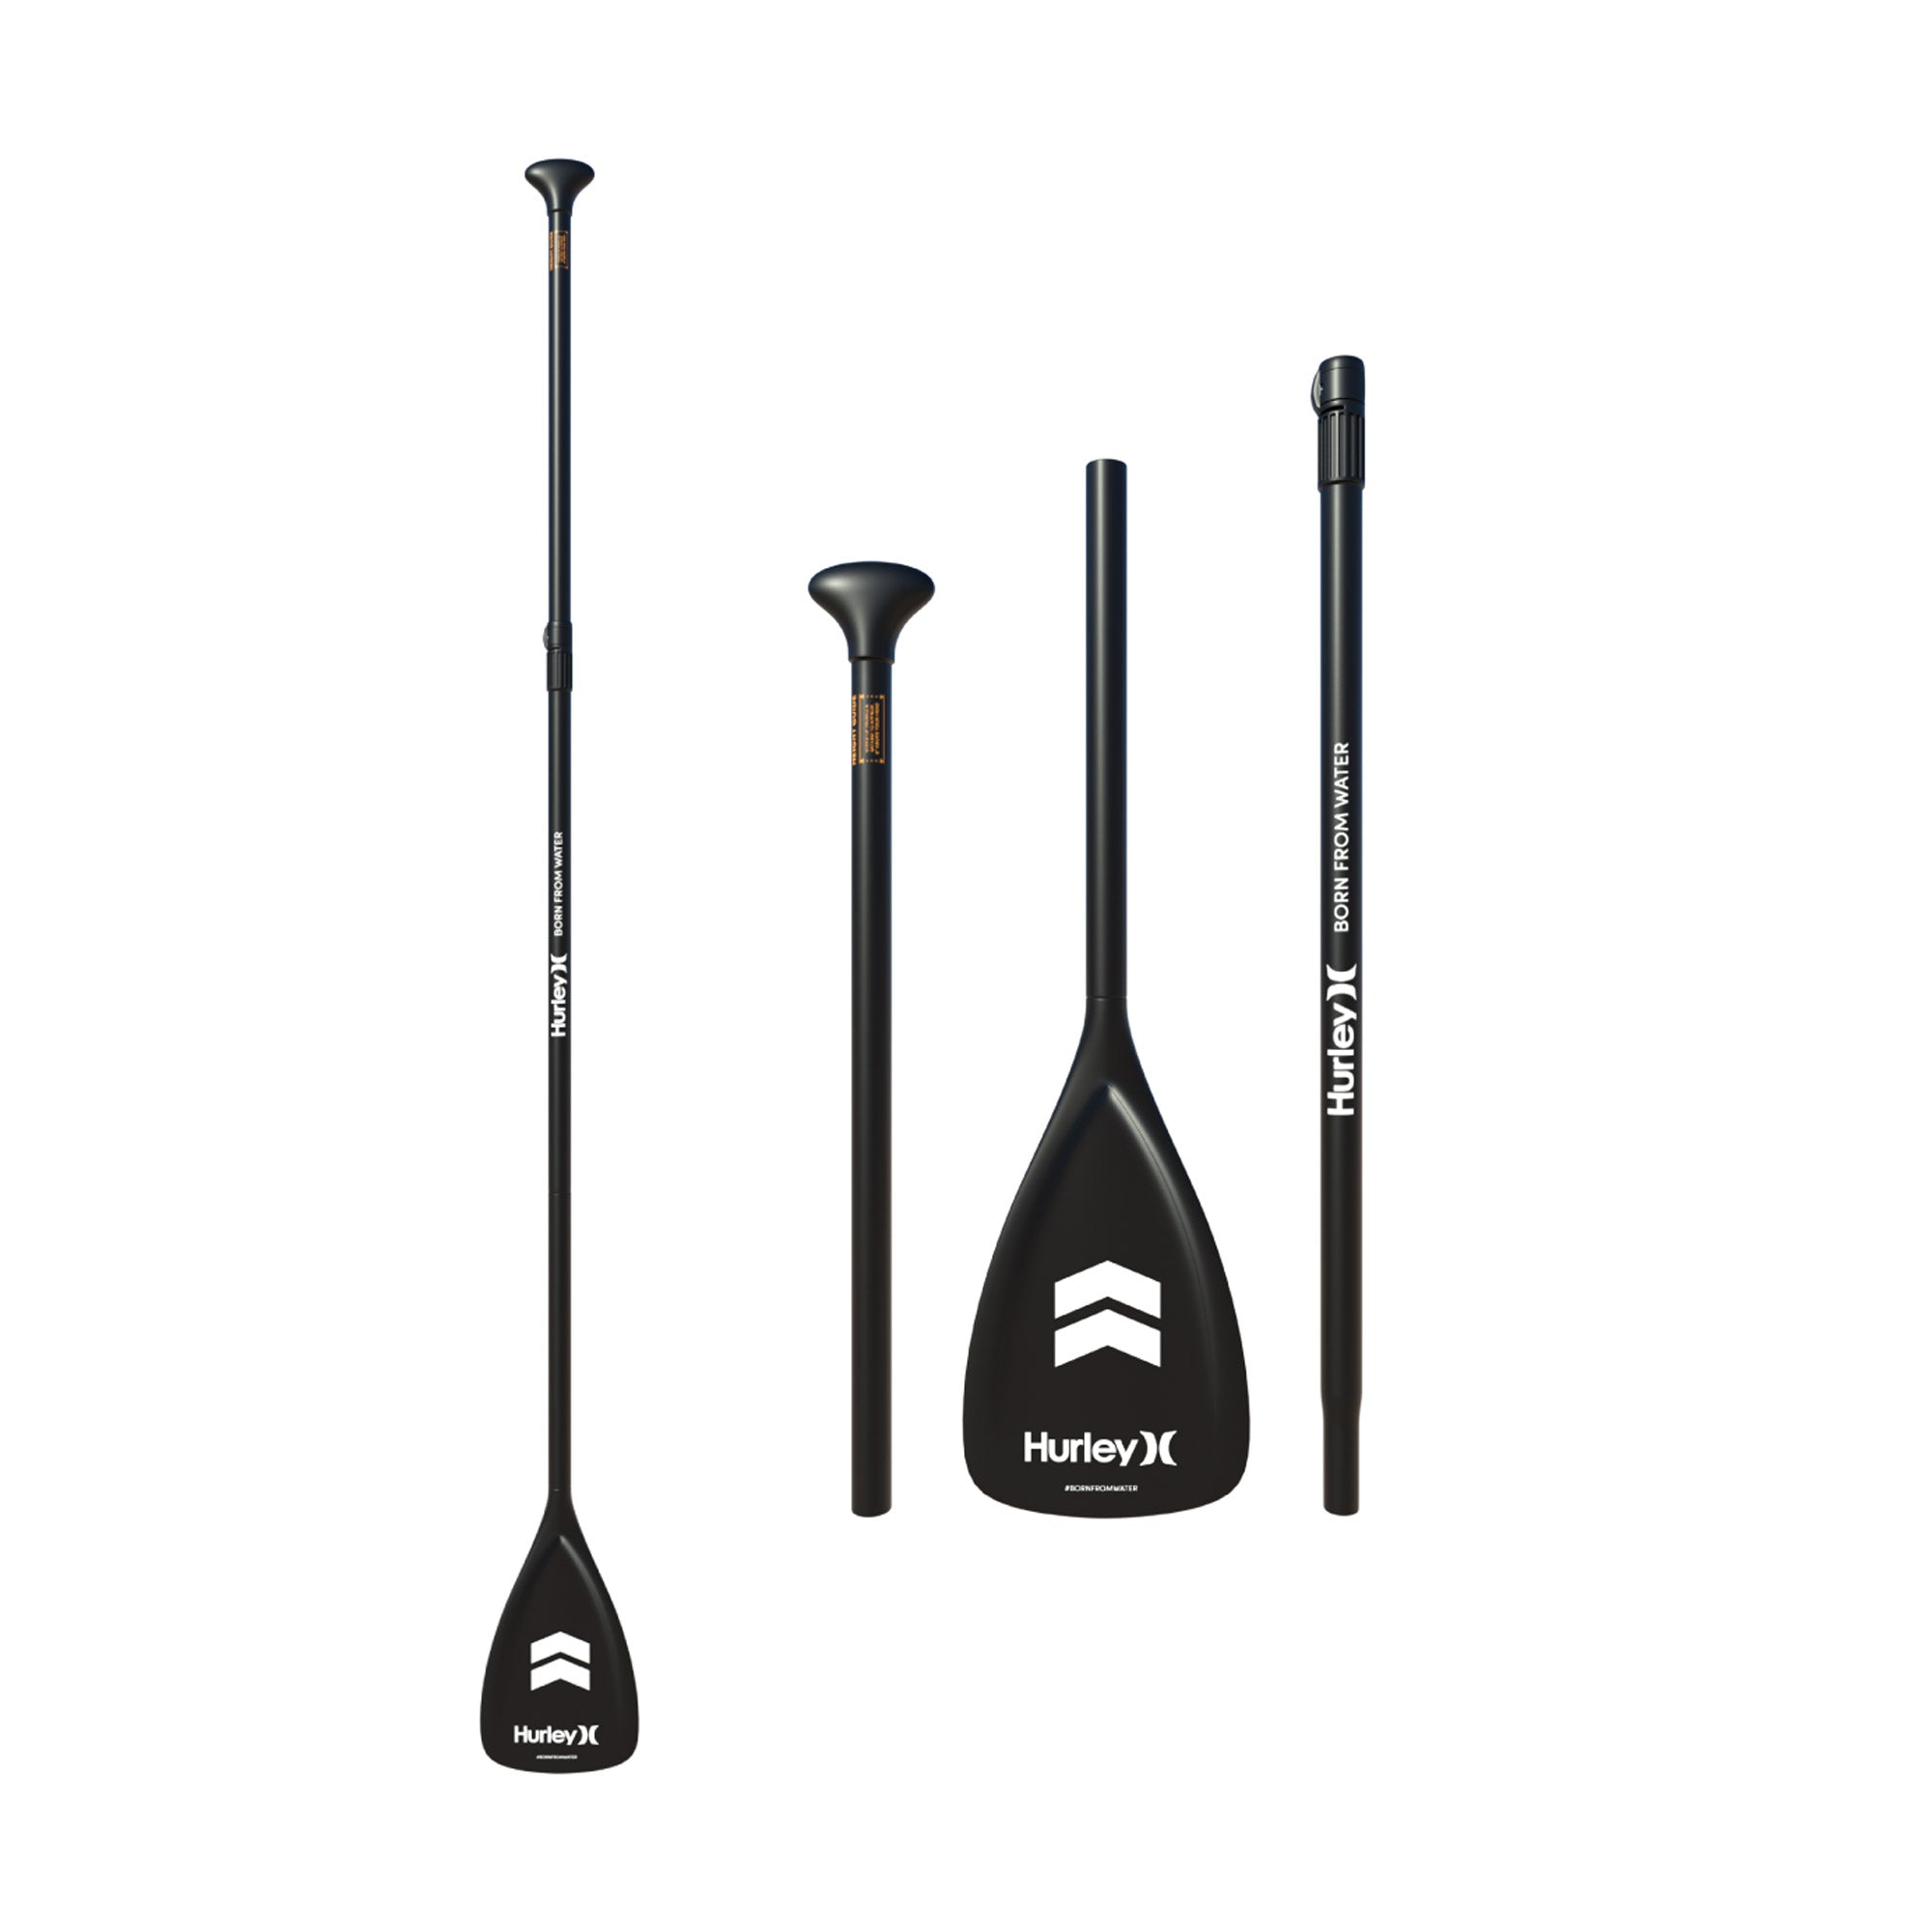 HURLEY SUP Stand Up Paddleboard Detachable and lightweight Paddle buy now at Heysurf.com